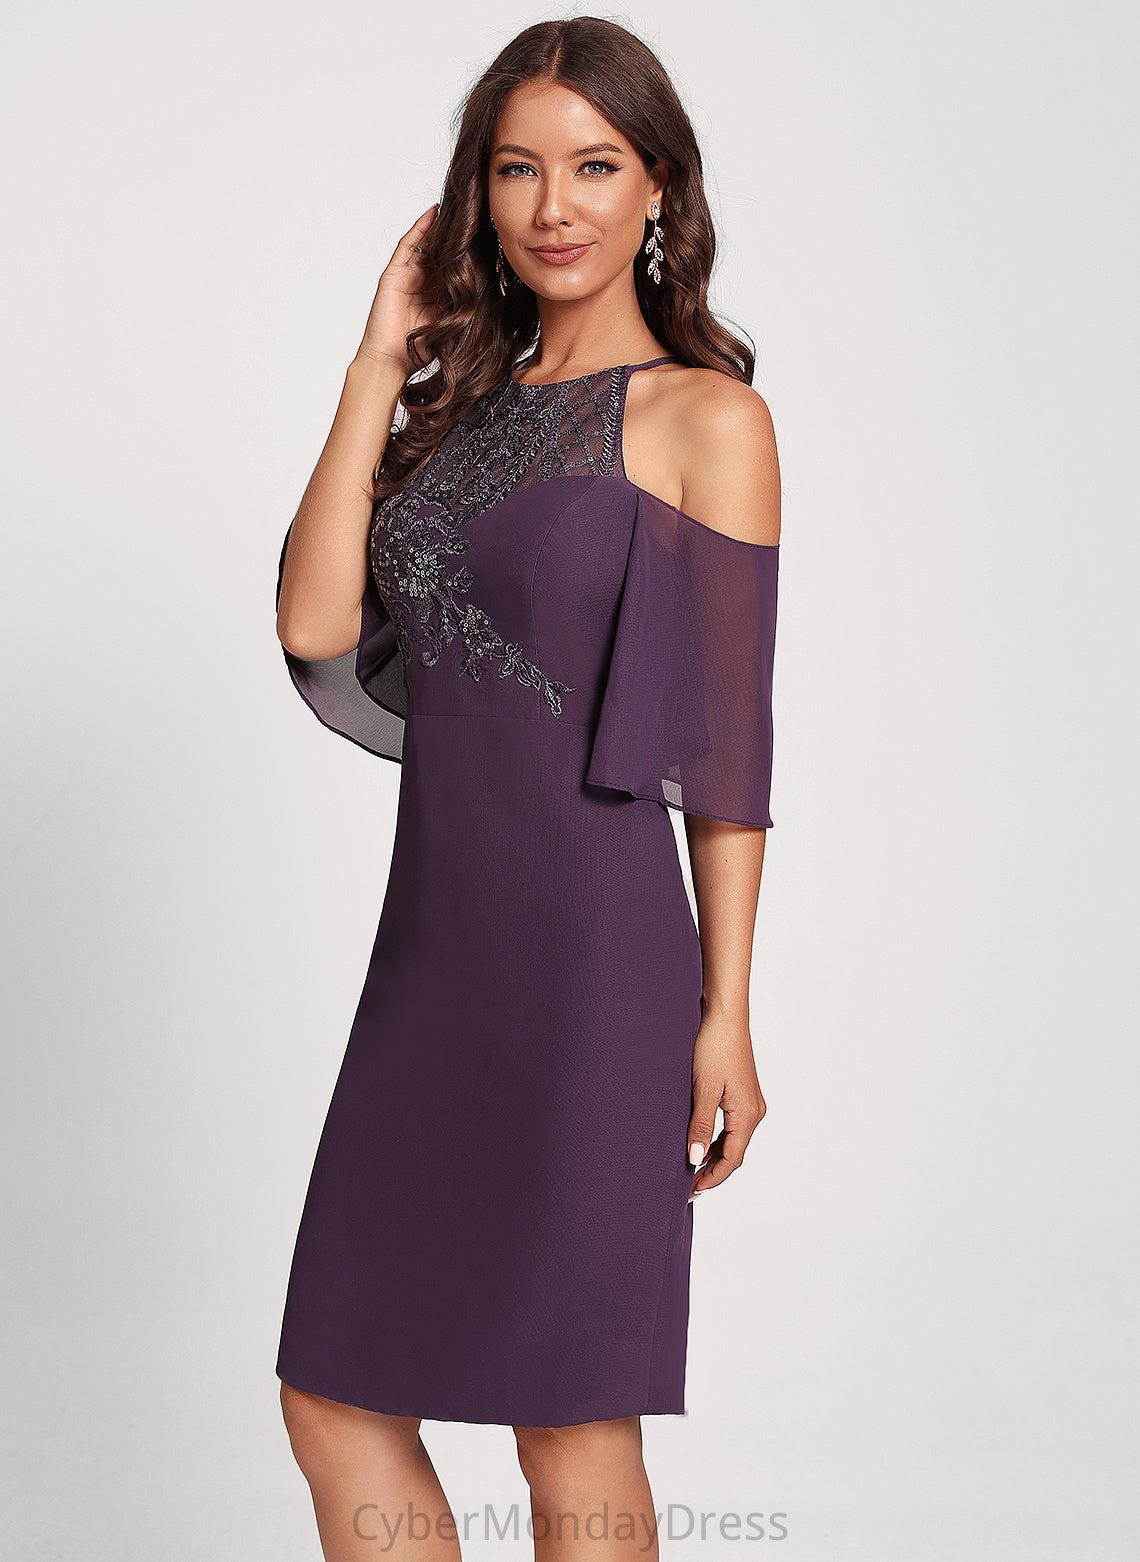 With Chiffon Knee-Length Shoulder Sequins Lace Club Dresses Cocktail Sheath/Column Peggie Cold Dress